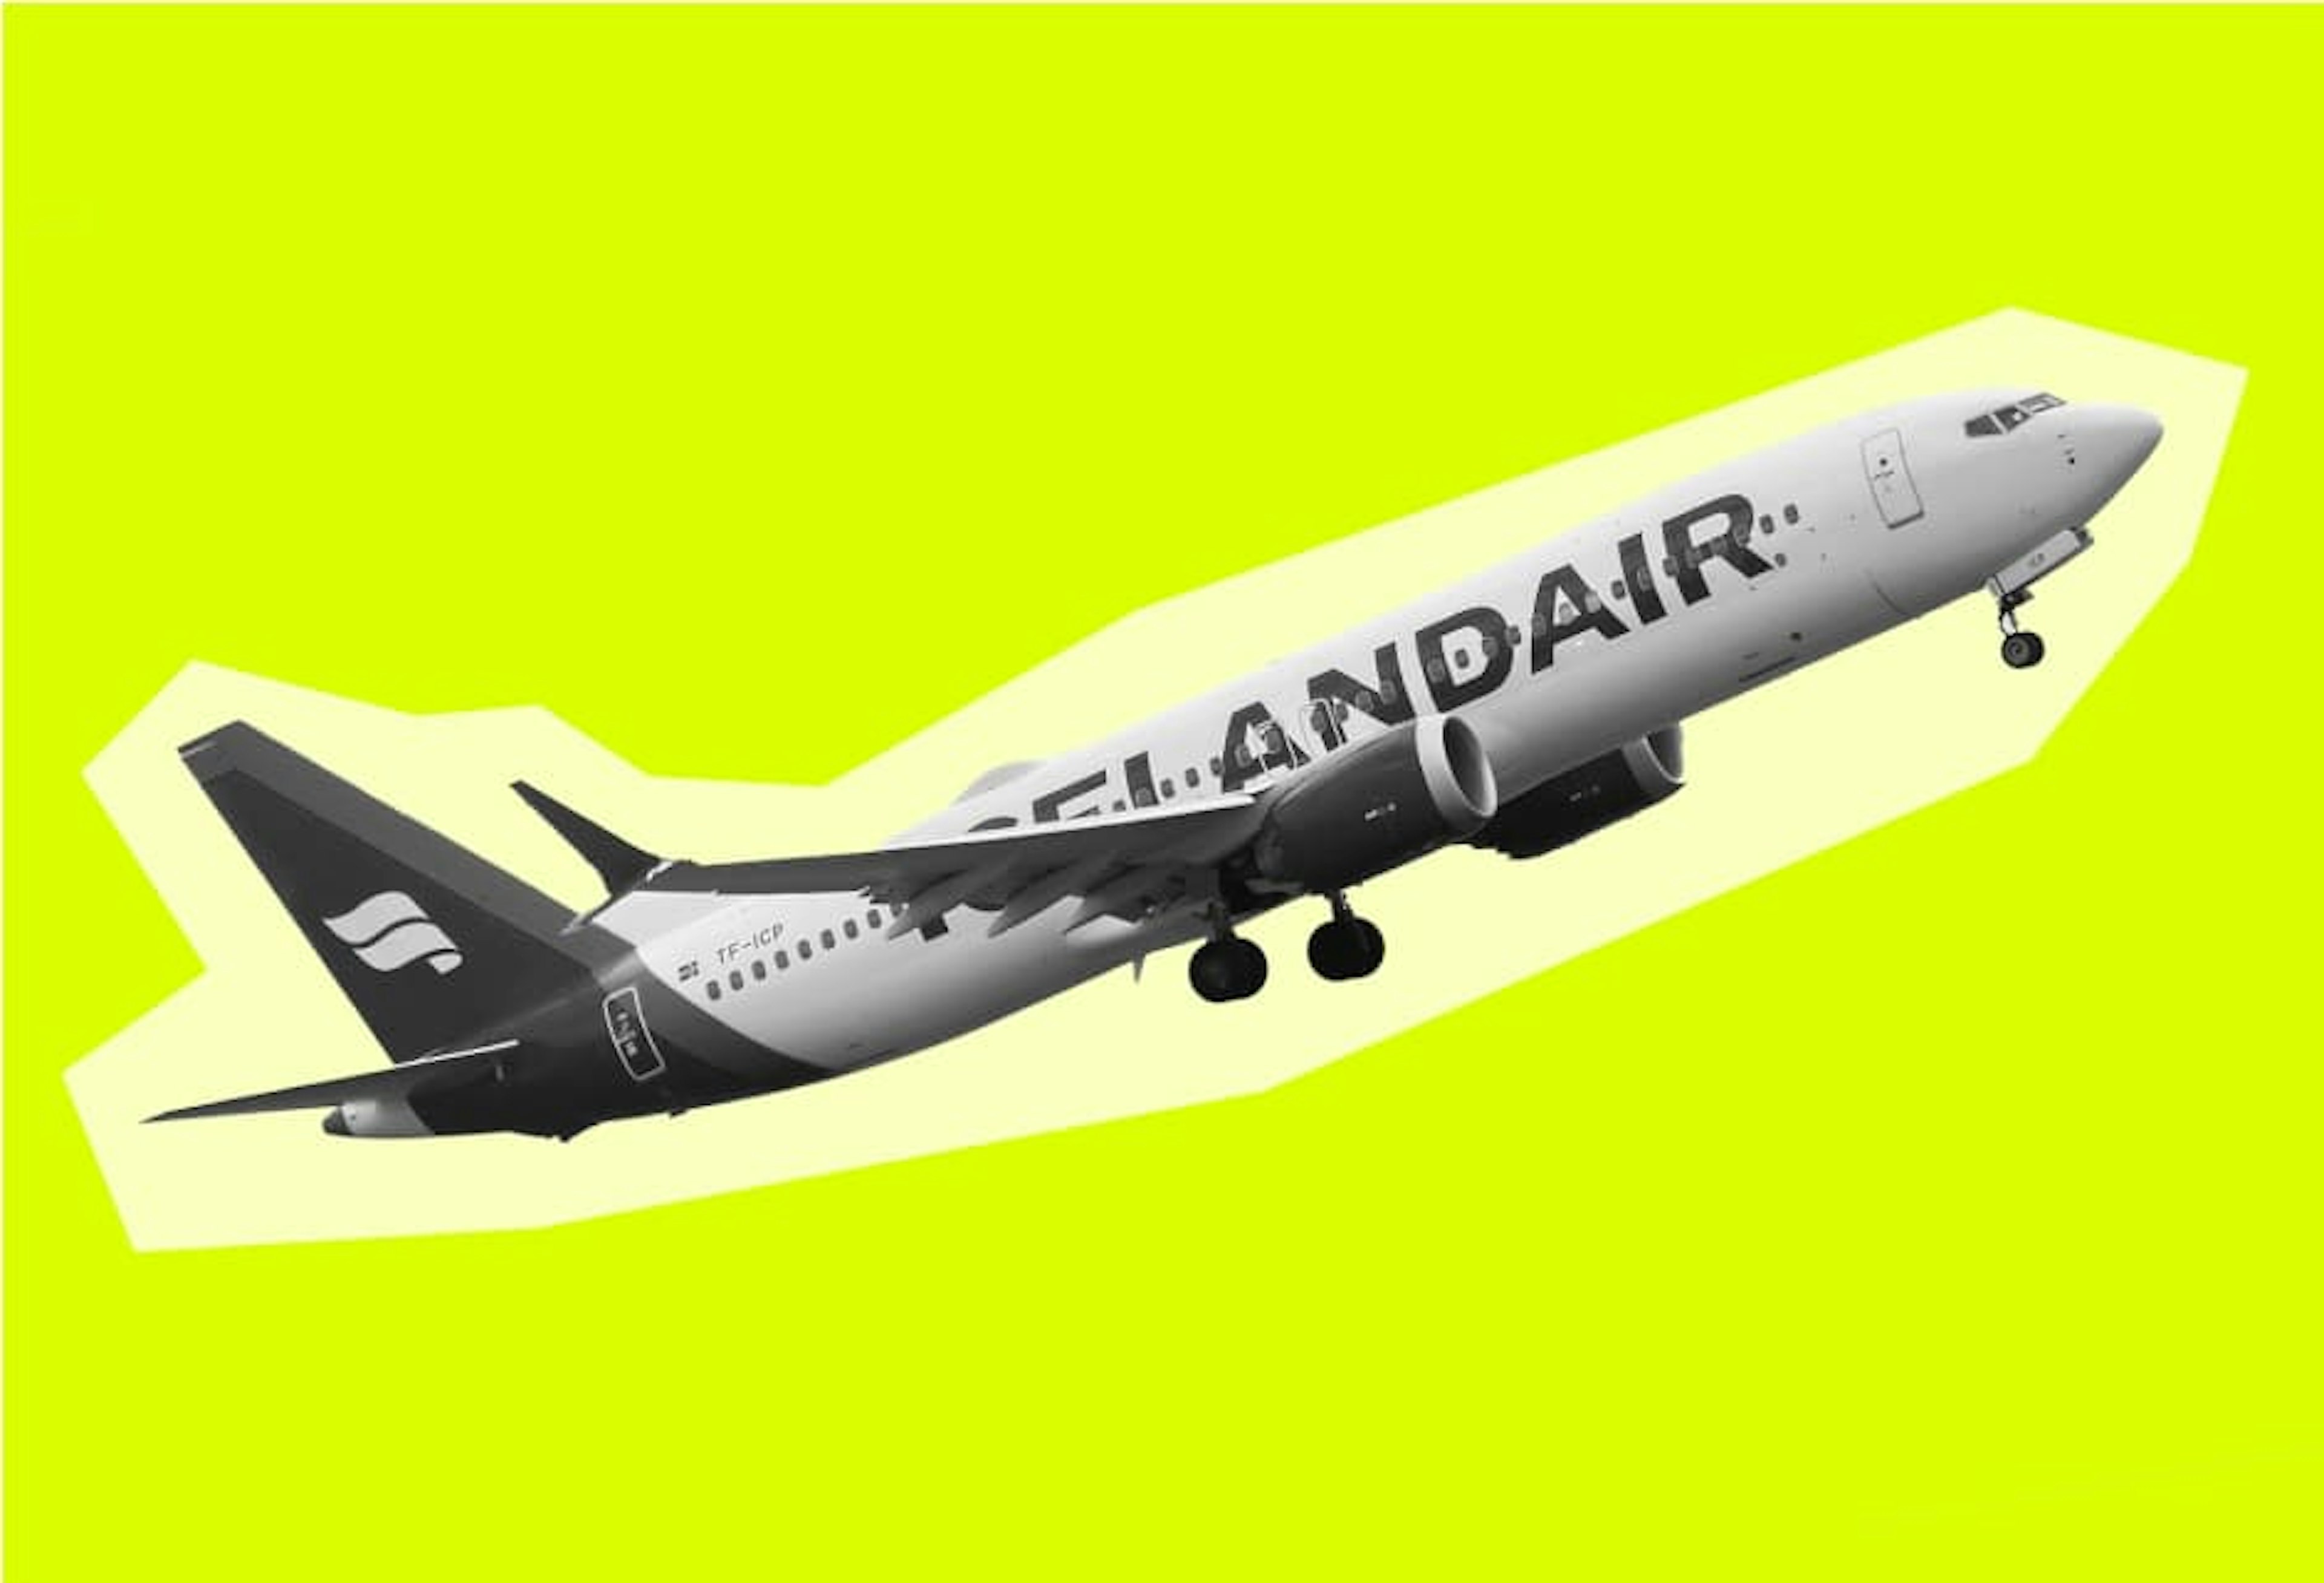 A clipped image of an Icelandair plane taking off on a lime green background.